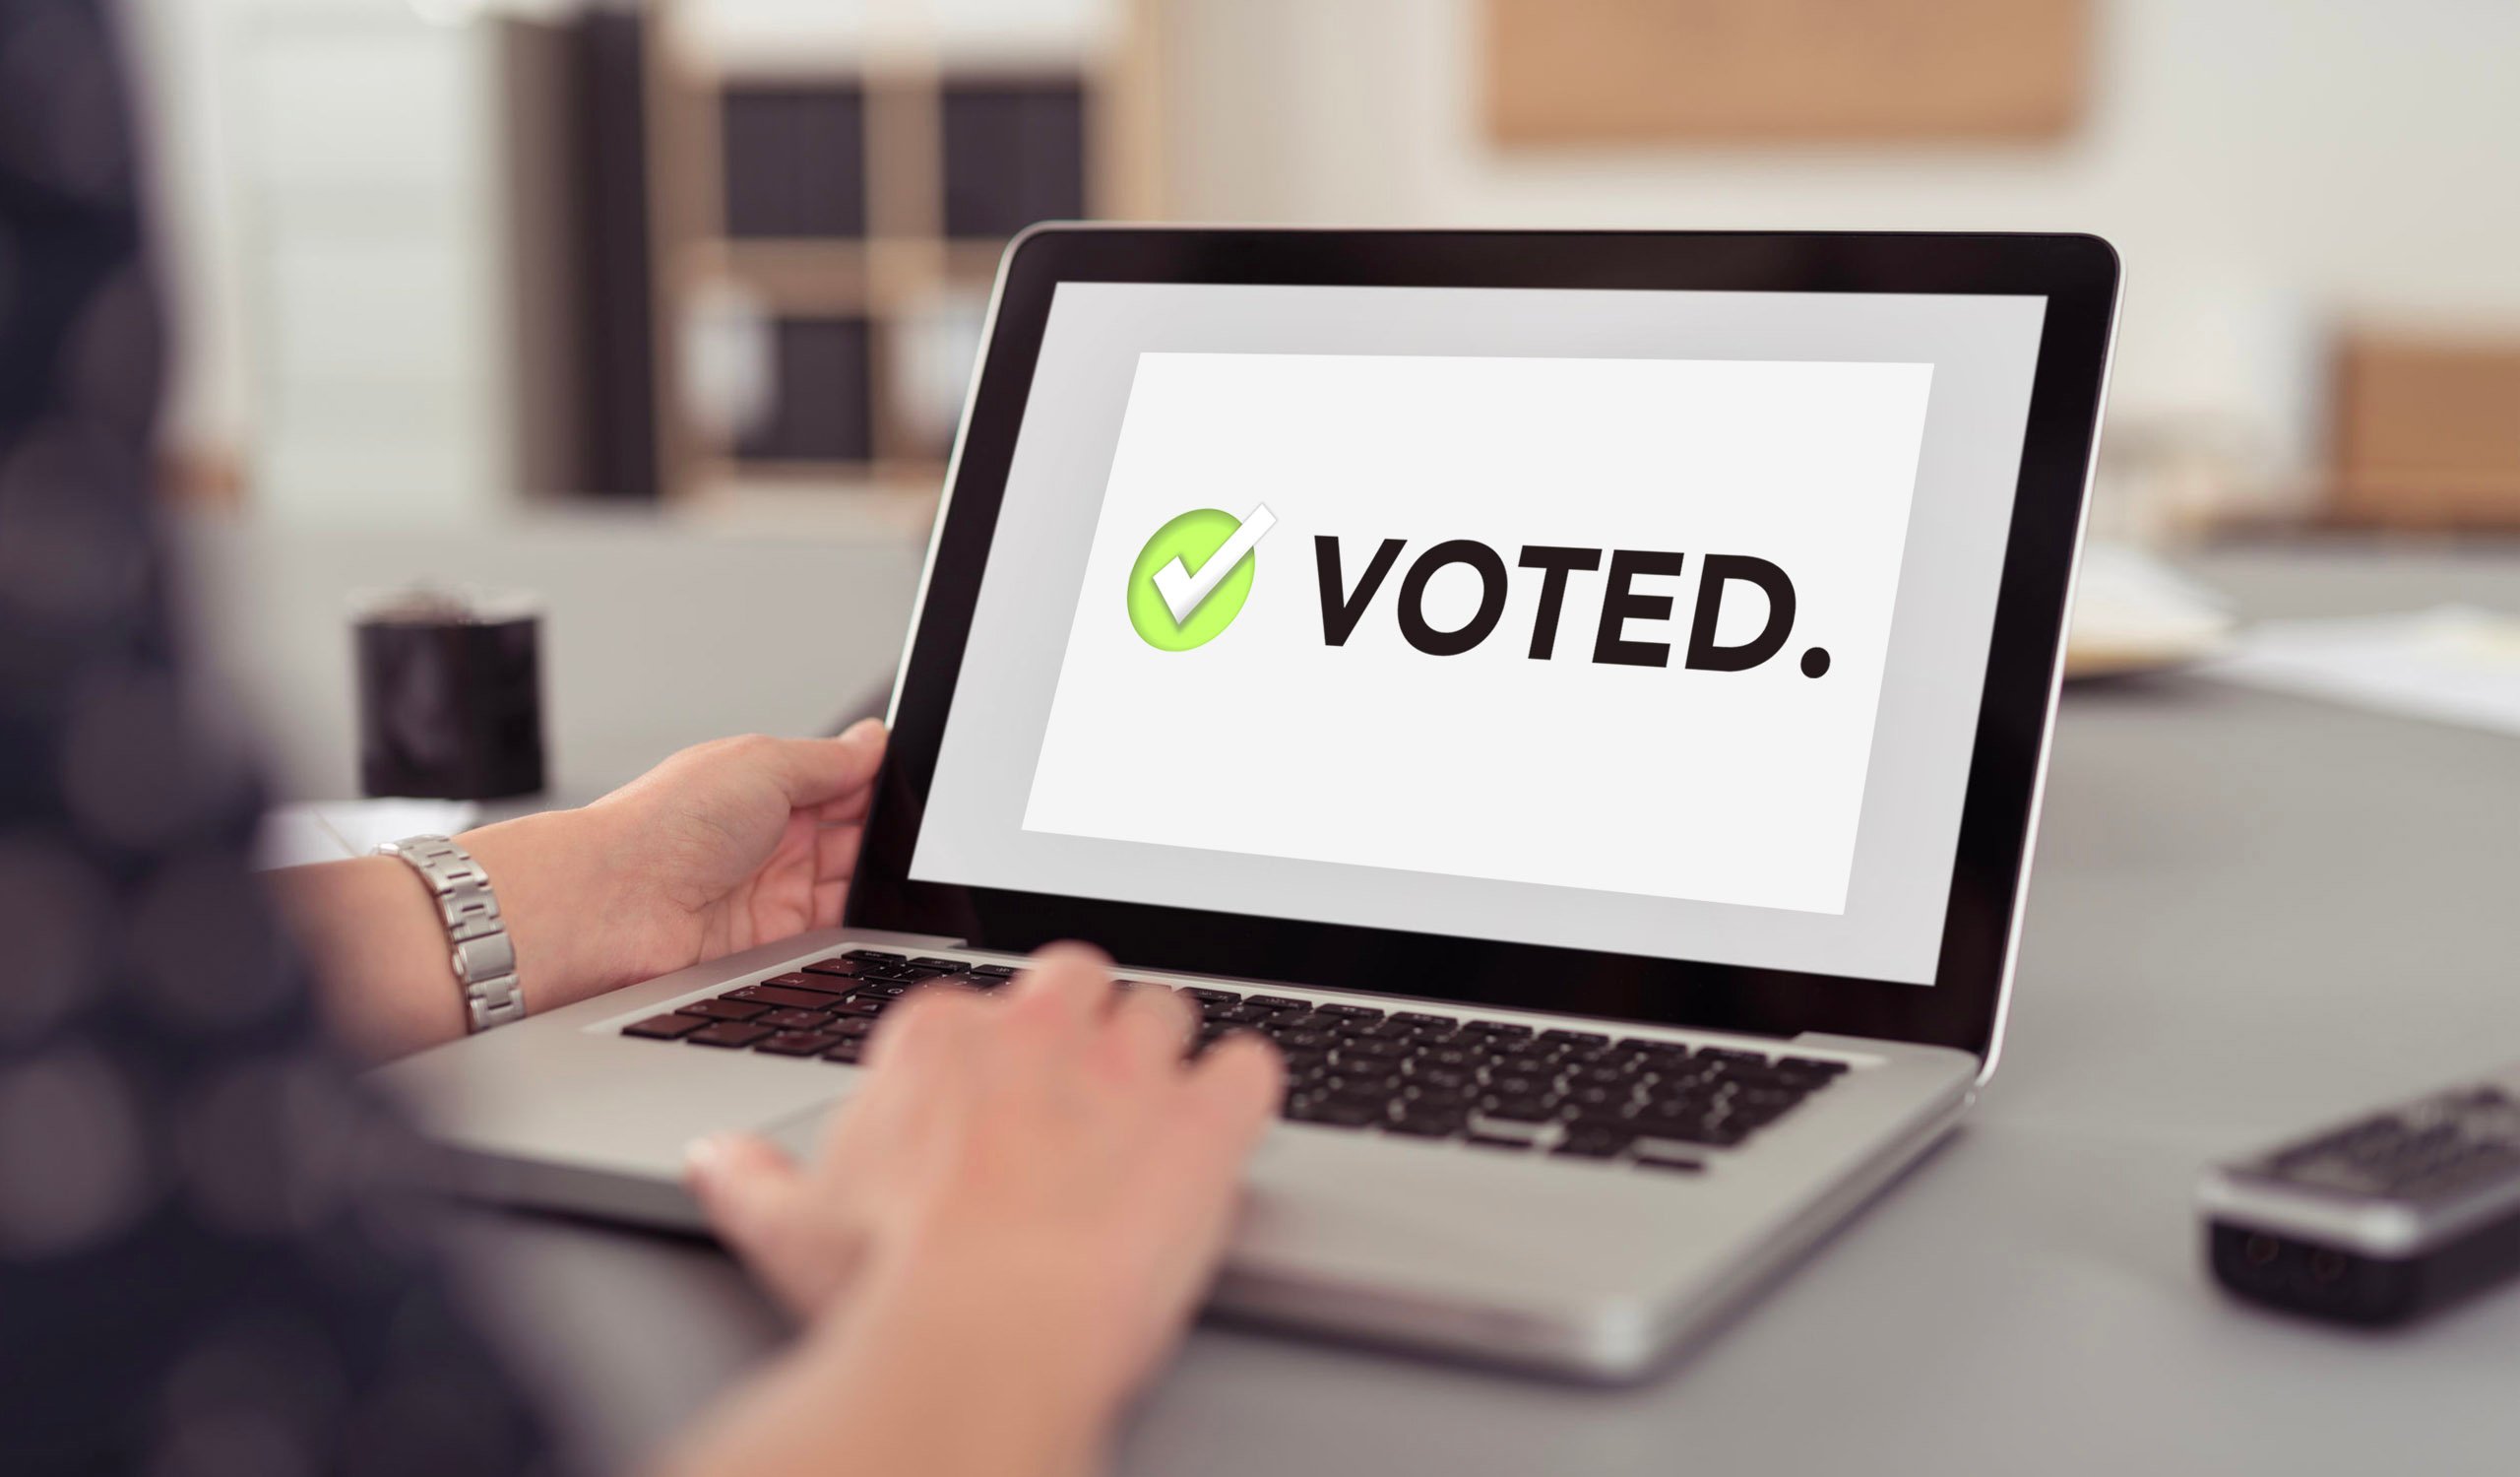 Top Features Every Online Voting System Should Have